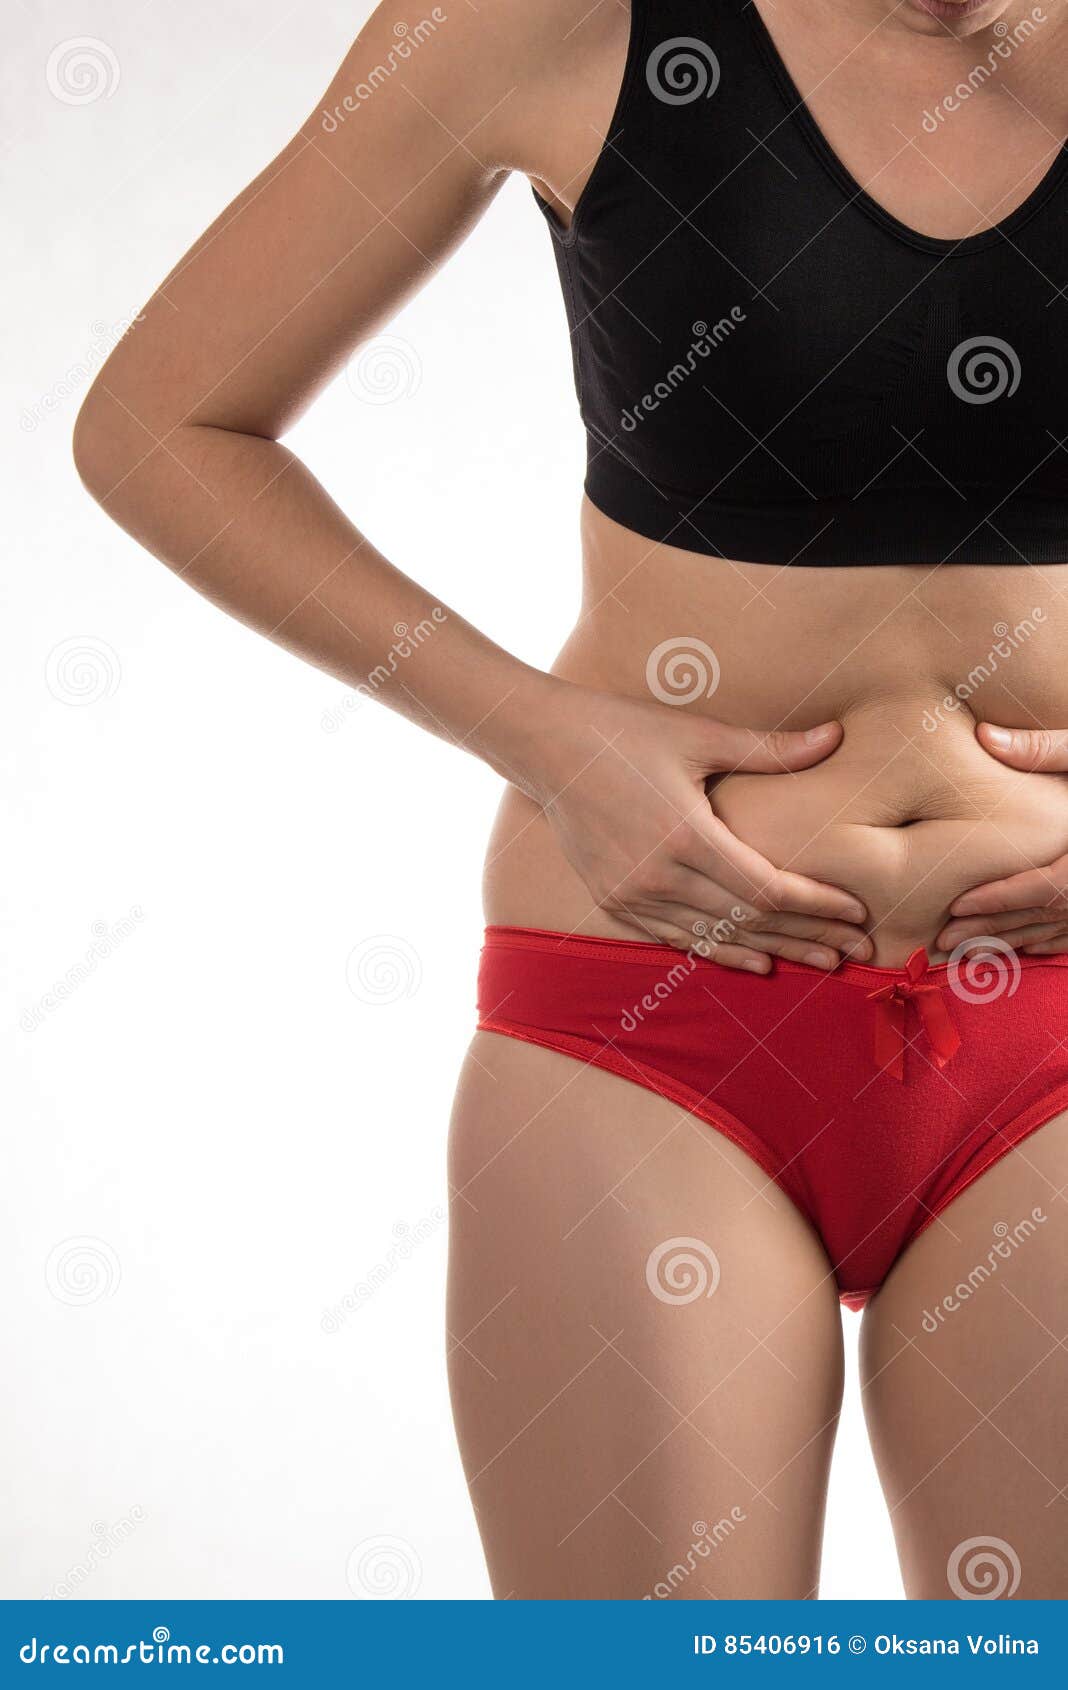 https://thumbs.dreamstime.com/z/girl-red-underwear-to-touch-fat-your-stomach-sports-waist-85406916.jpg